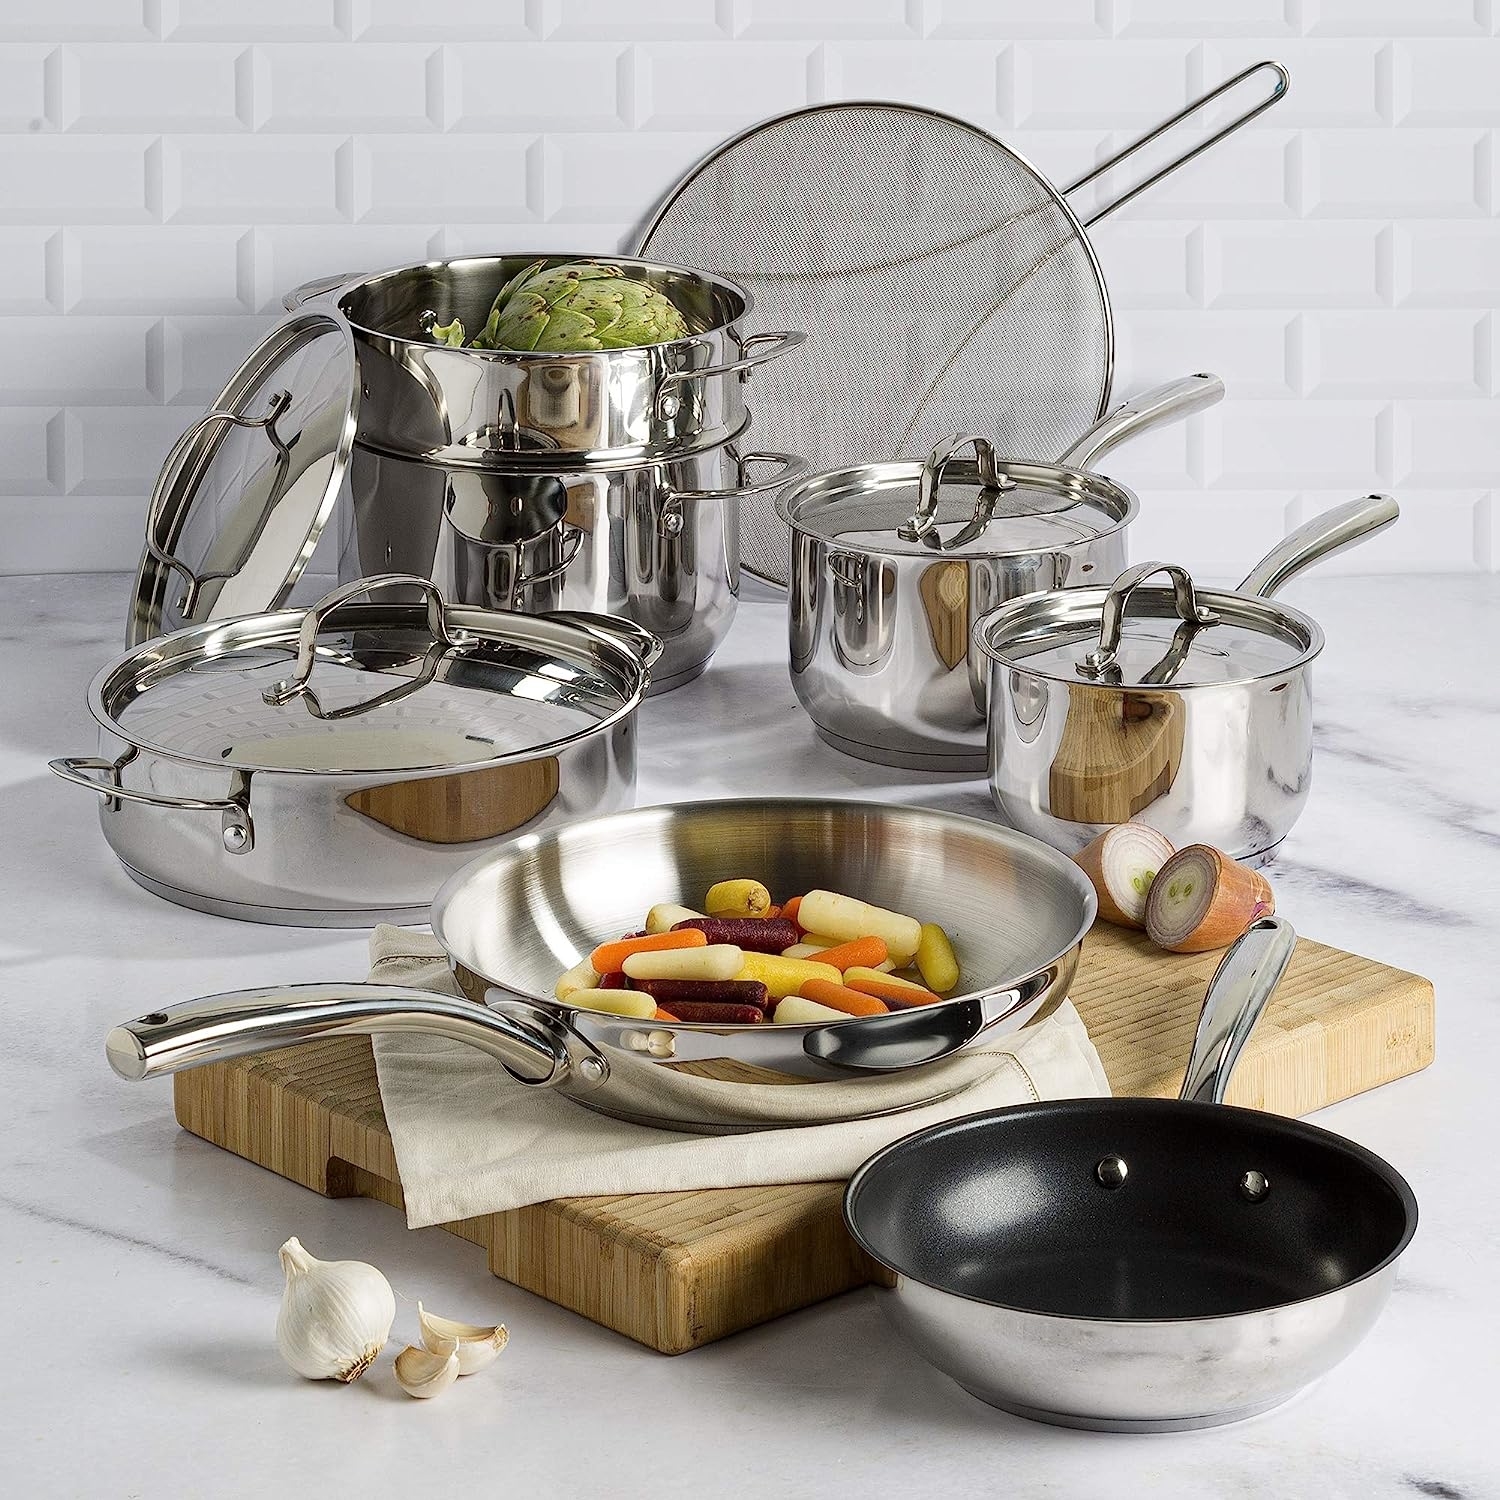 the 12-piece stainless steel cookware set